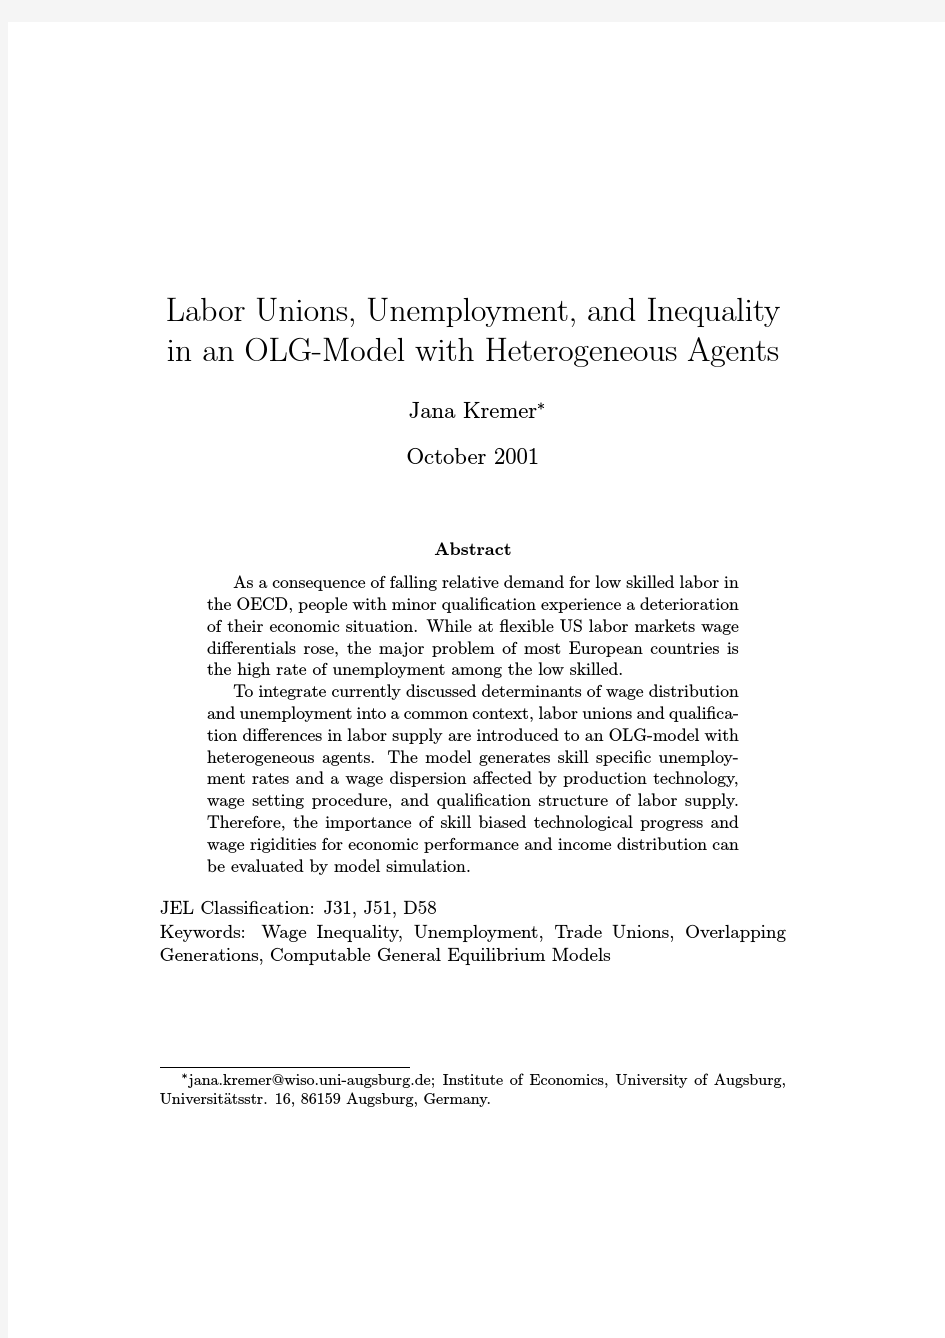 Labor Unions, Unemployment, and Inequality in an OLG-Model with Heterogeneous Agents